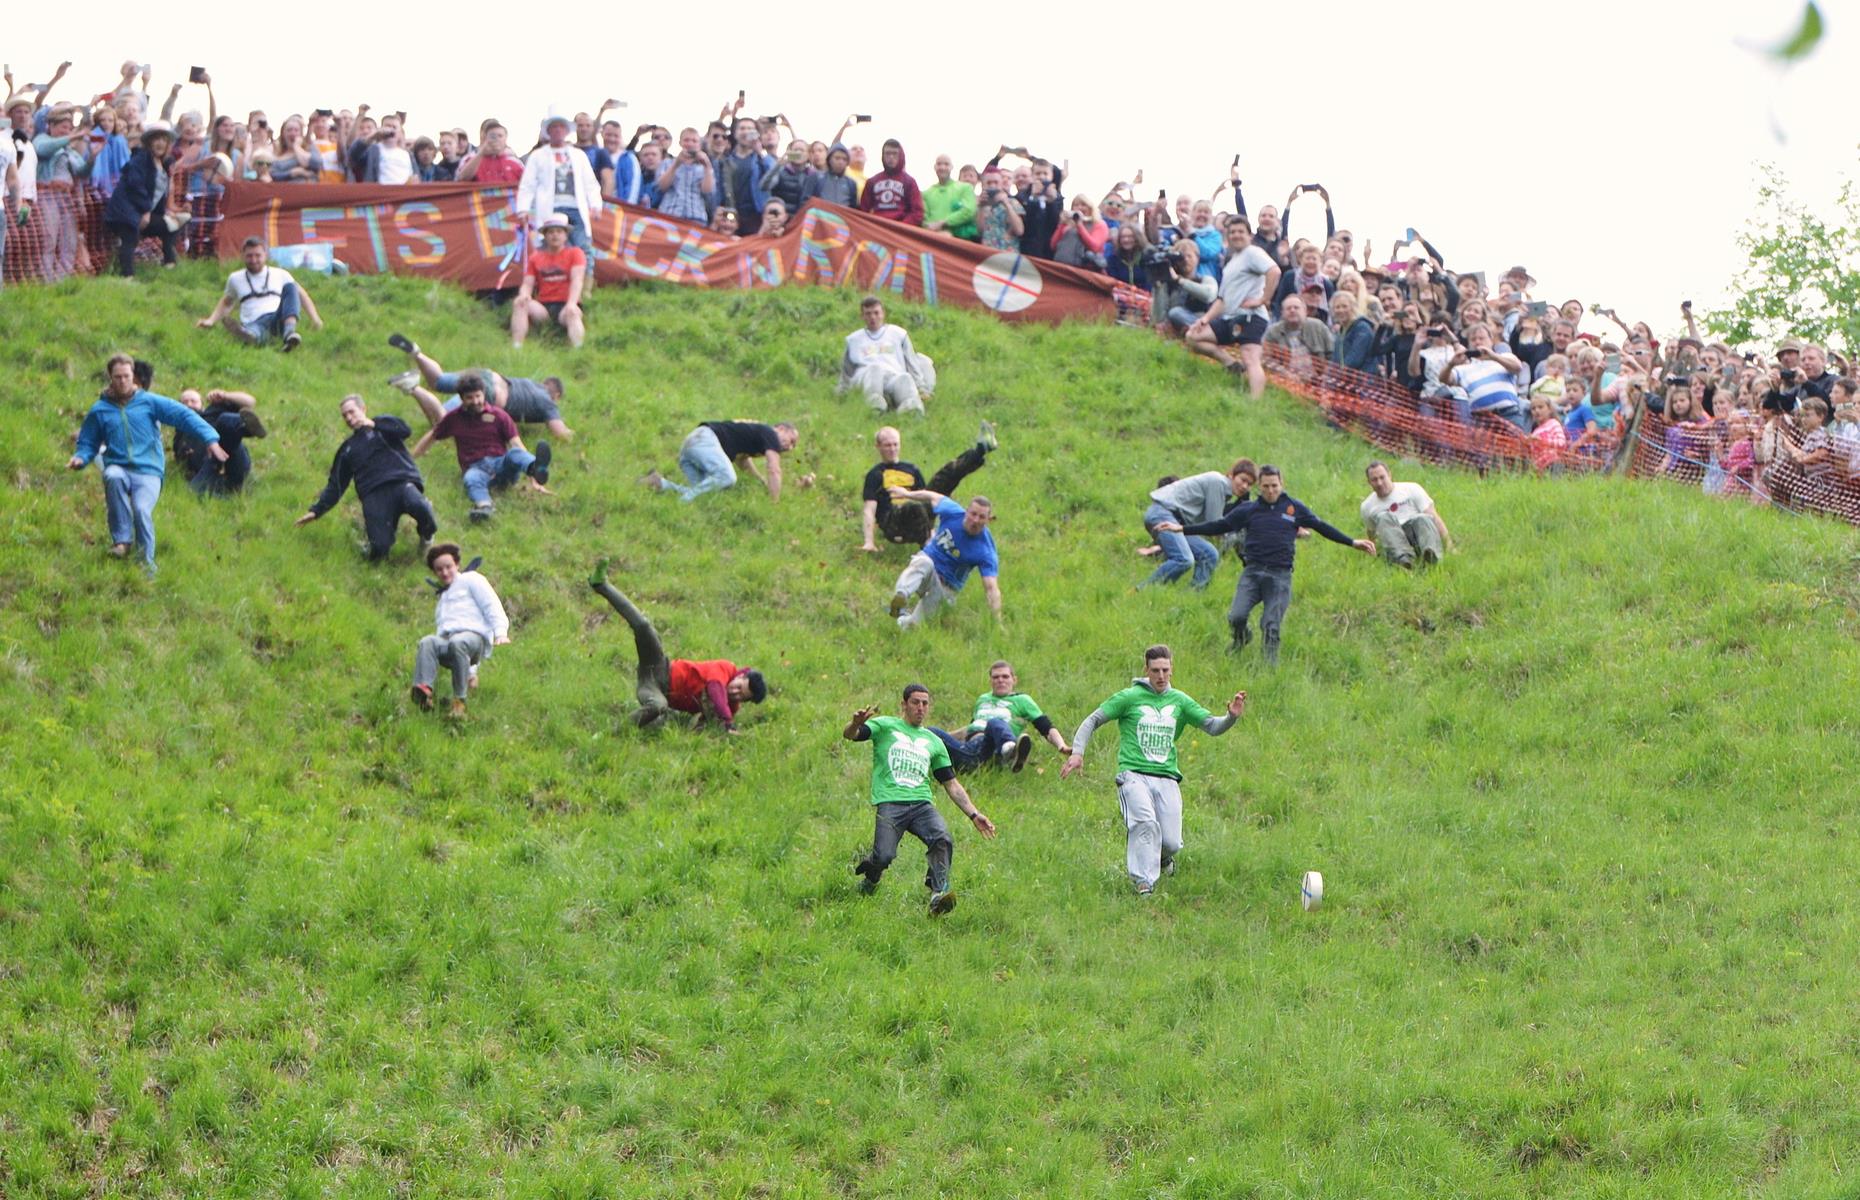 <p>Britain has no shortage of strange fairs, fetes, and festivals, and visitors keen to walk on the country’s weirder side should certainly seek them out. Perhaps the most eccentric is an annual cheese-rolling contest in Gloucestershire, in which participants hurl themselves downhill in pursuit of a wheel of cheese. Wales’ bog snorkeling championships come a close second.</p>